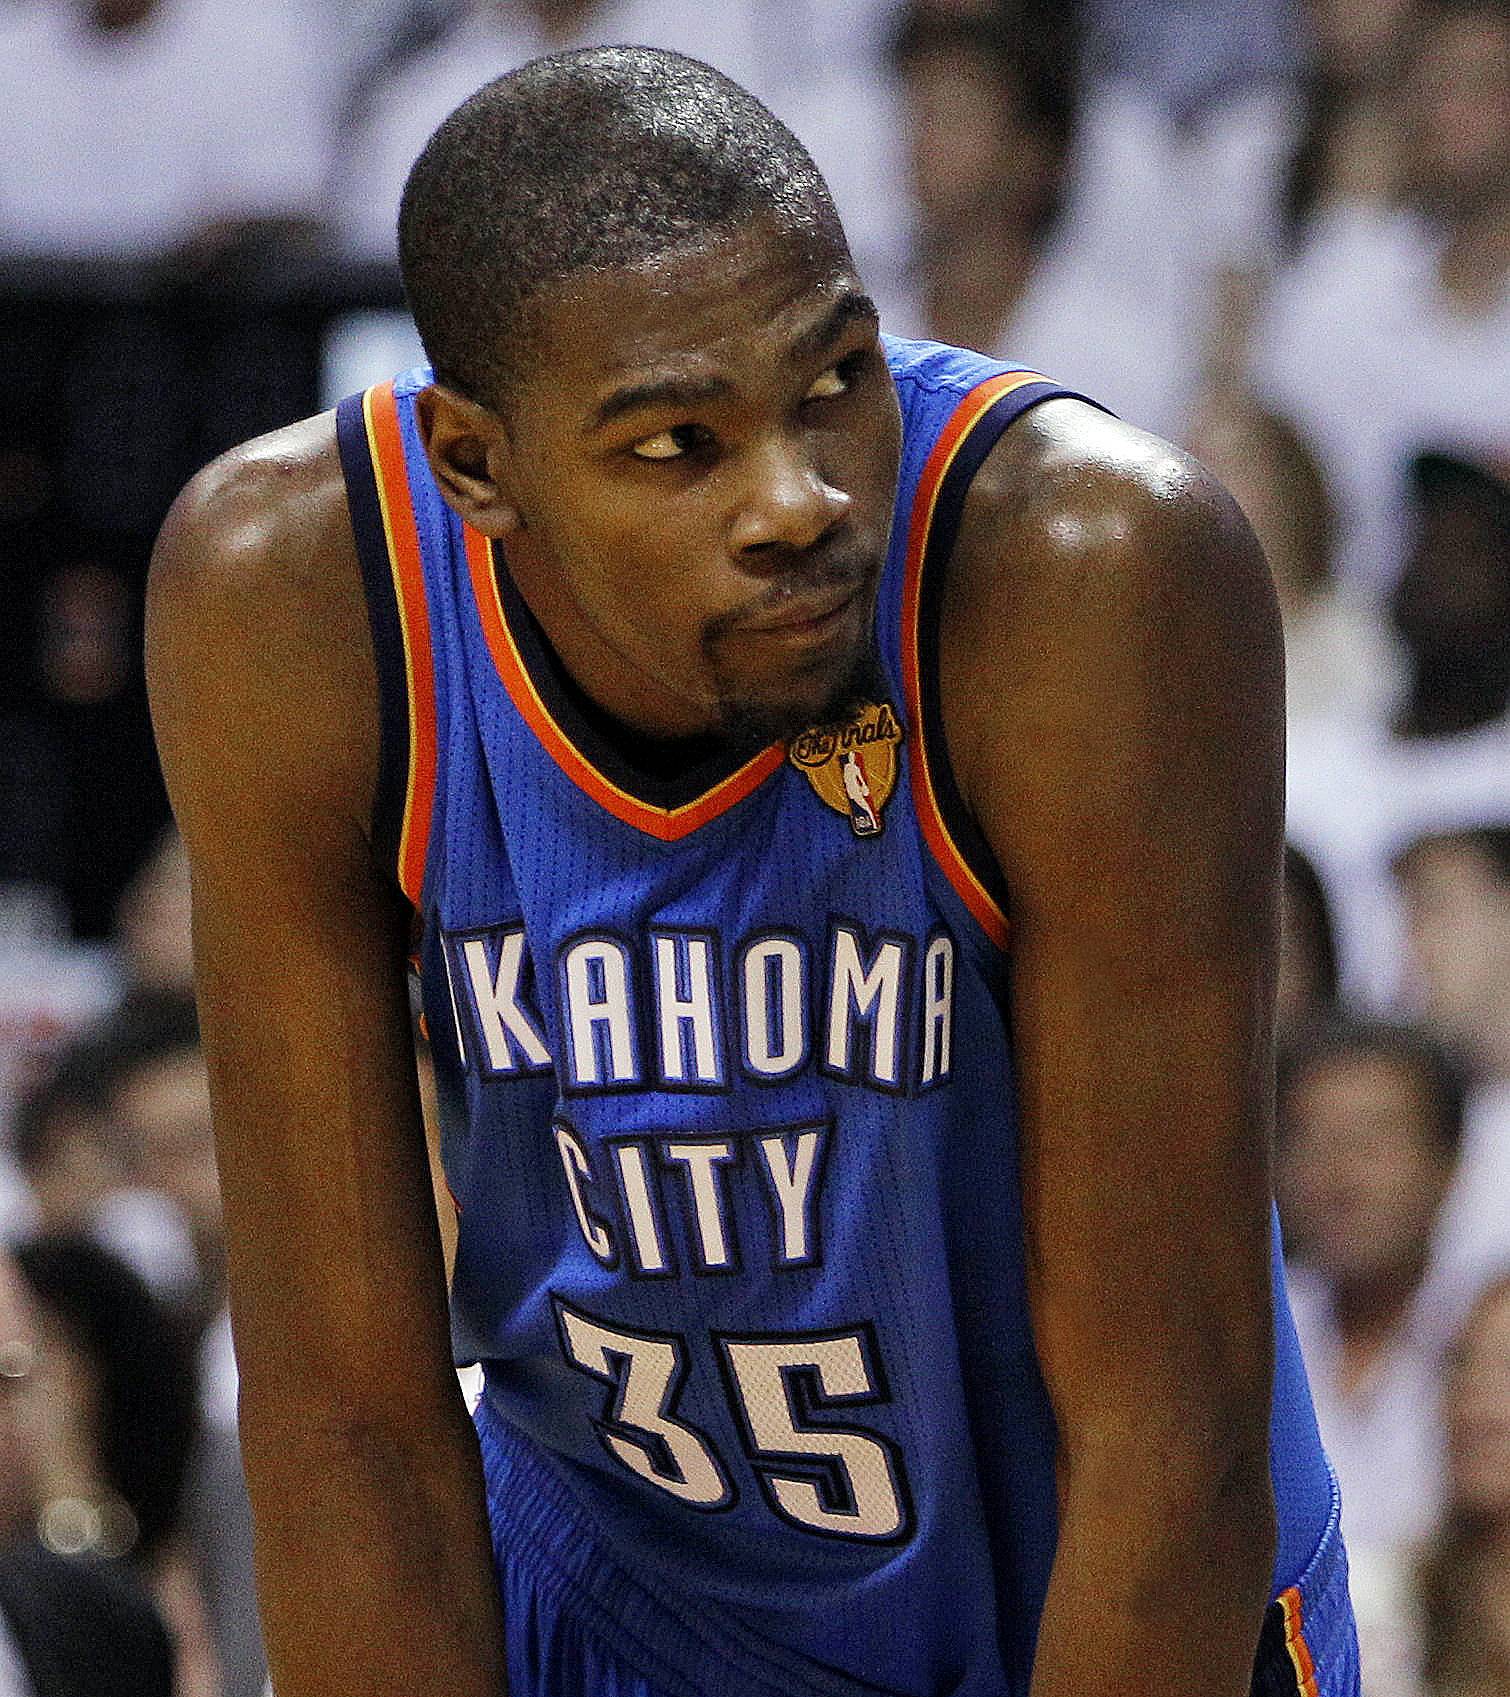 &quot;My Name Is My Name&quot; - Oklahoma City Thunder baller Kevin Durant is one of the league’s top scorers. He’s known as “KD” and the “Slim Reaper,” but now the All-Star is changing his nickname and wants to be known as “The Servant.”&nbsp; Check out nicknames for other star athletes. — Dominique Zonyéé (@DominiqueZonyee)(Photo: Lynne Sladky/AP Photo)